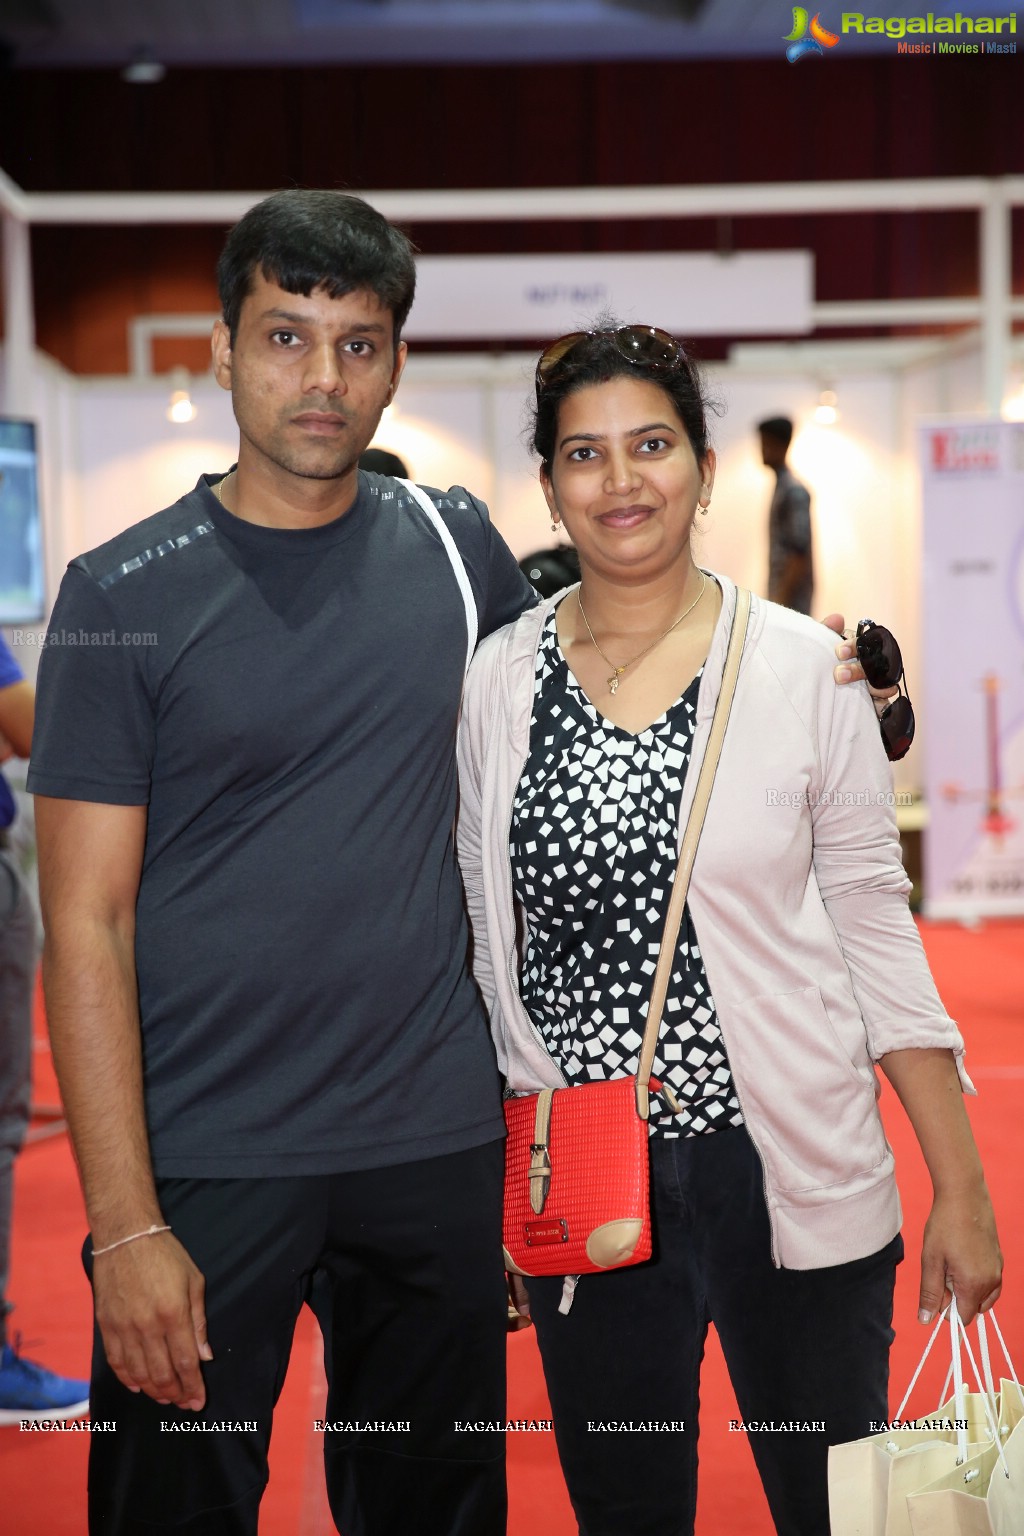 India’s Premier Sport Expo Launch at HITEX